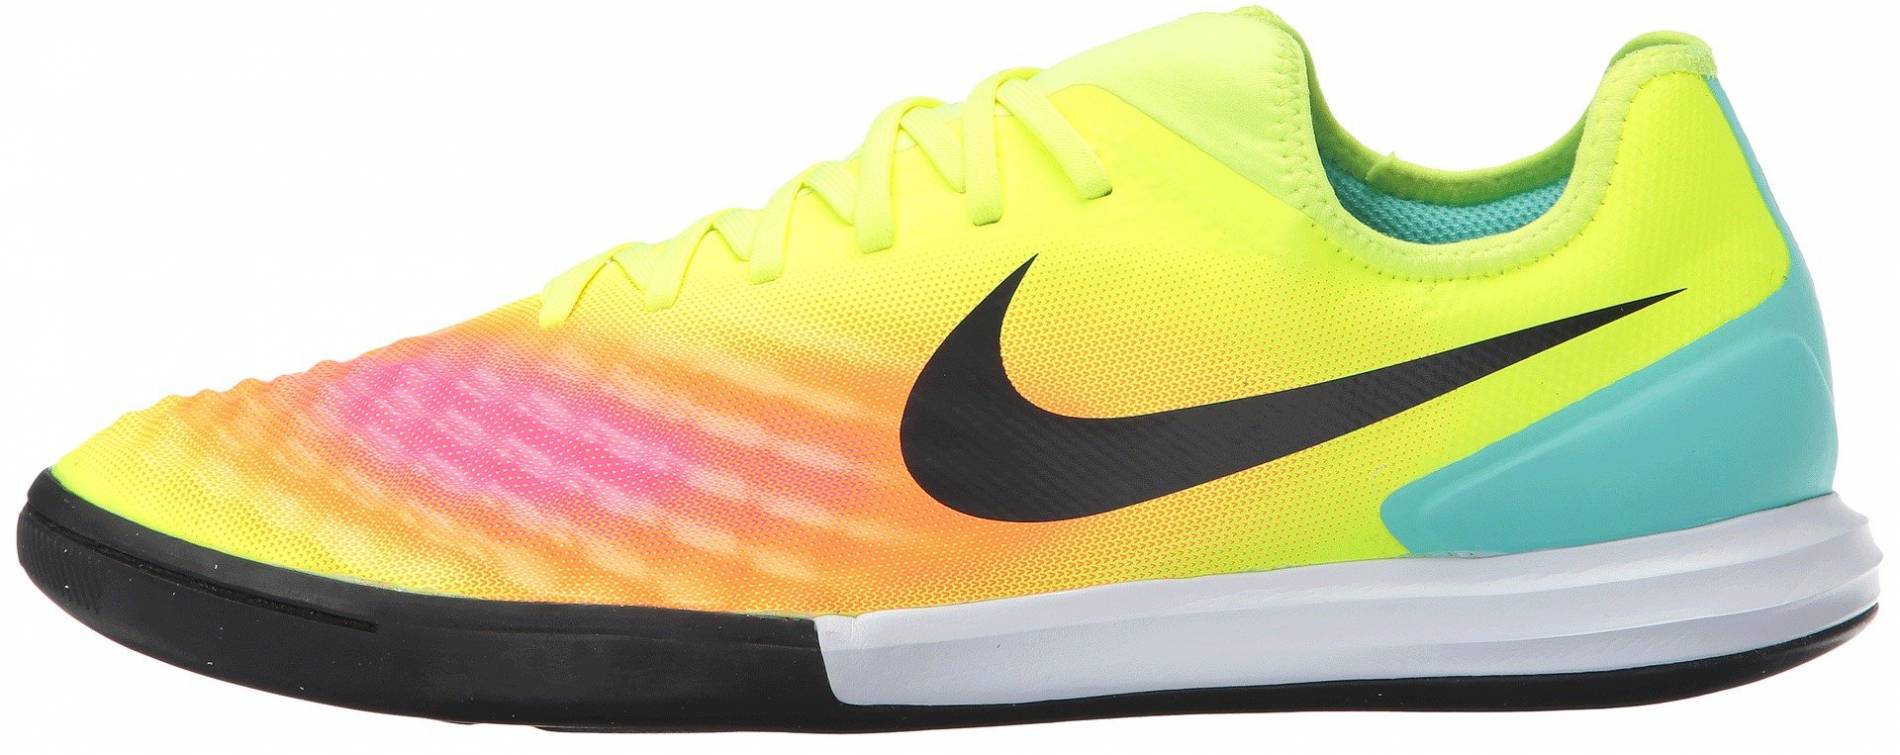 nike magistax finale 2 ic